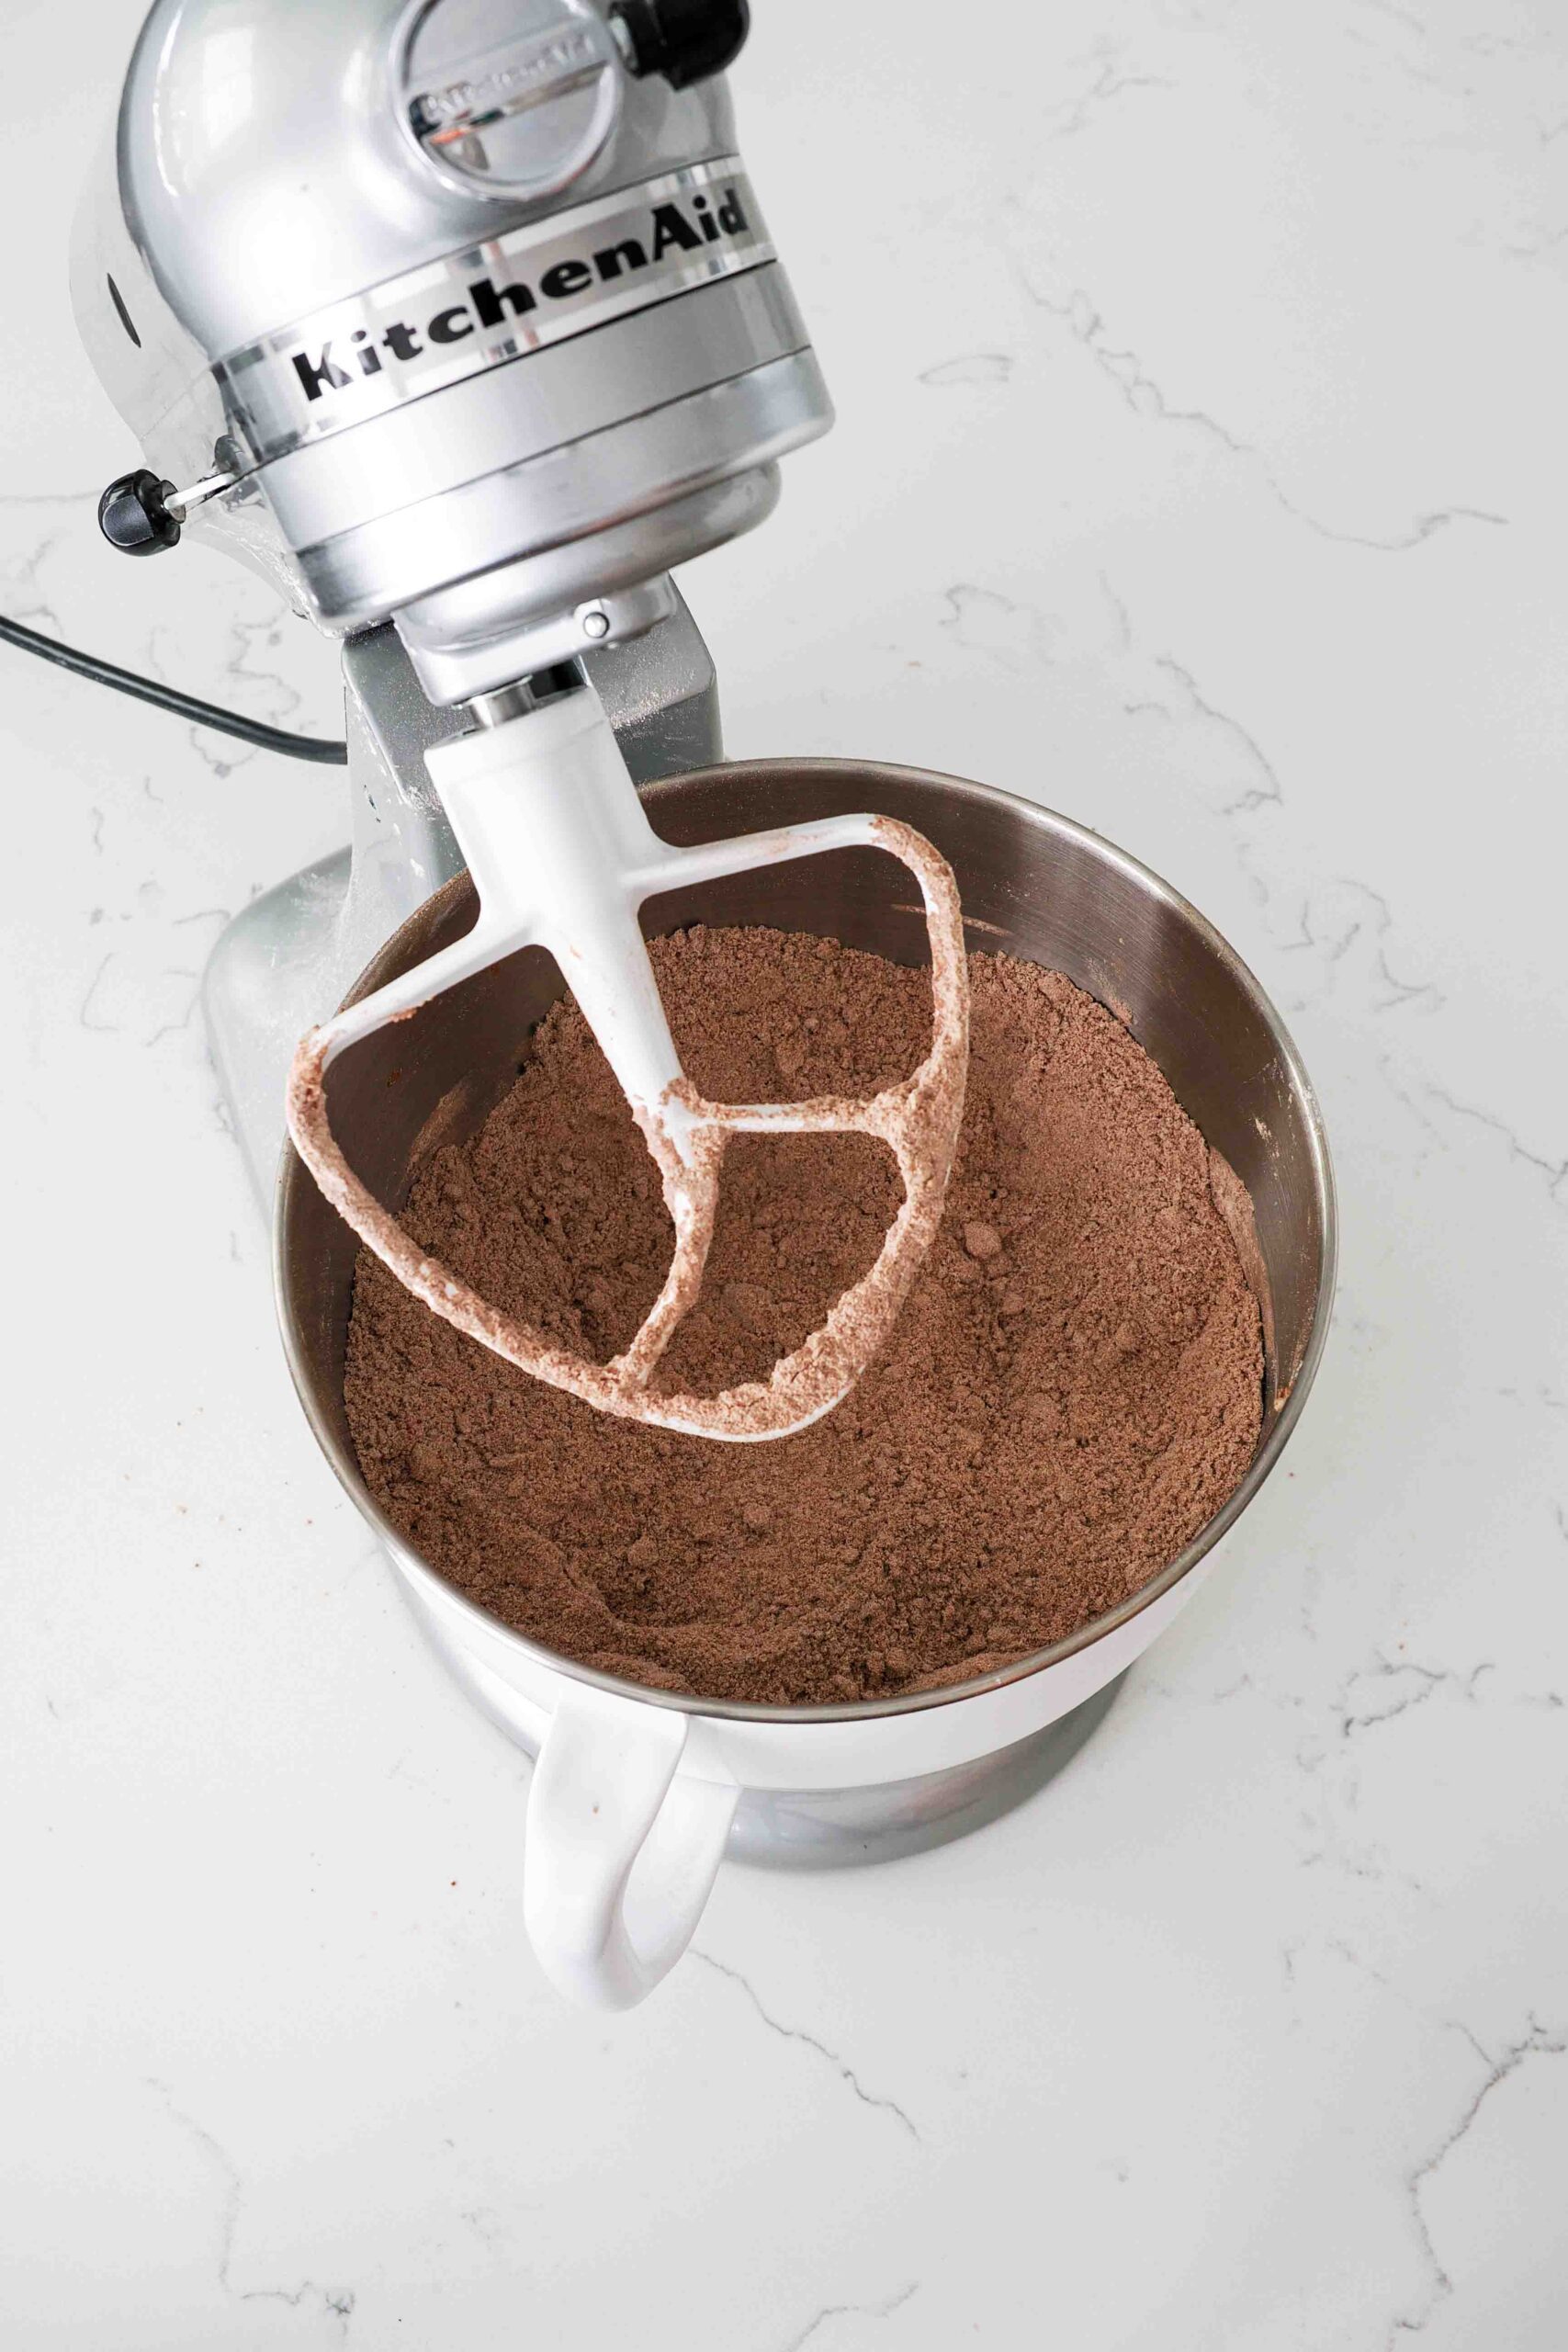 Dark and sandy-looking gingerbread cookie dough in a stand mixer bowl.